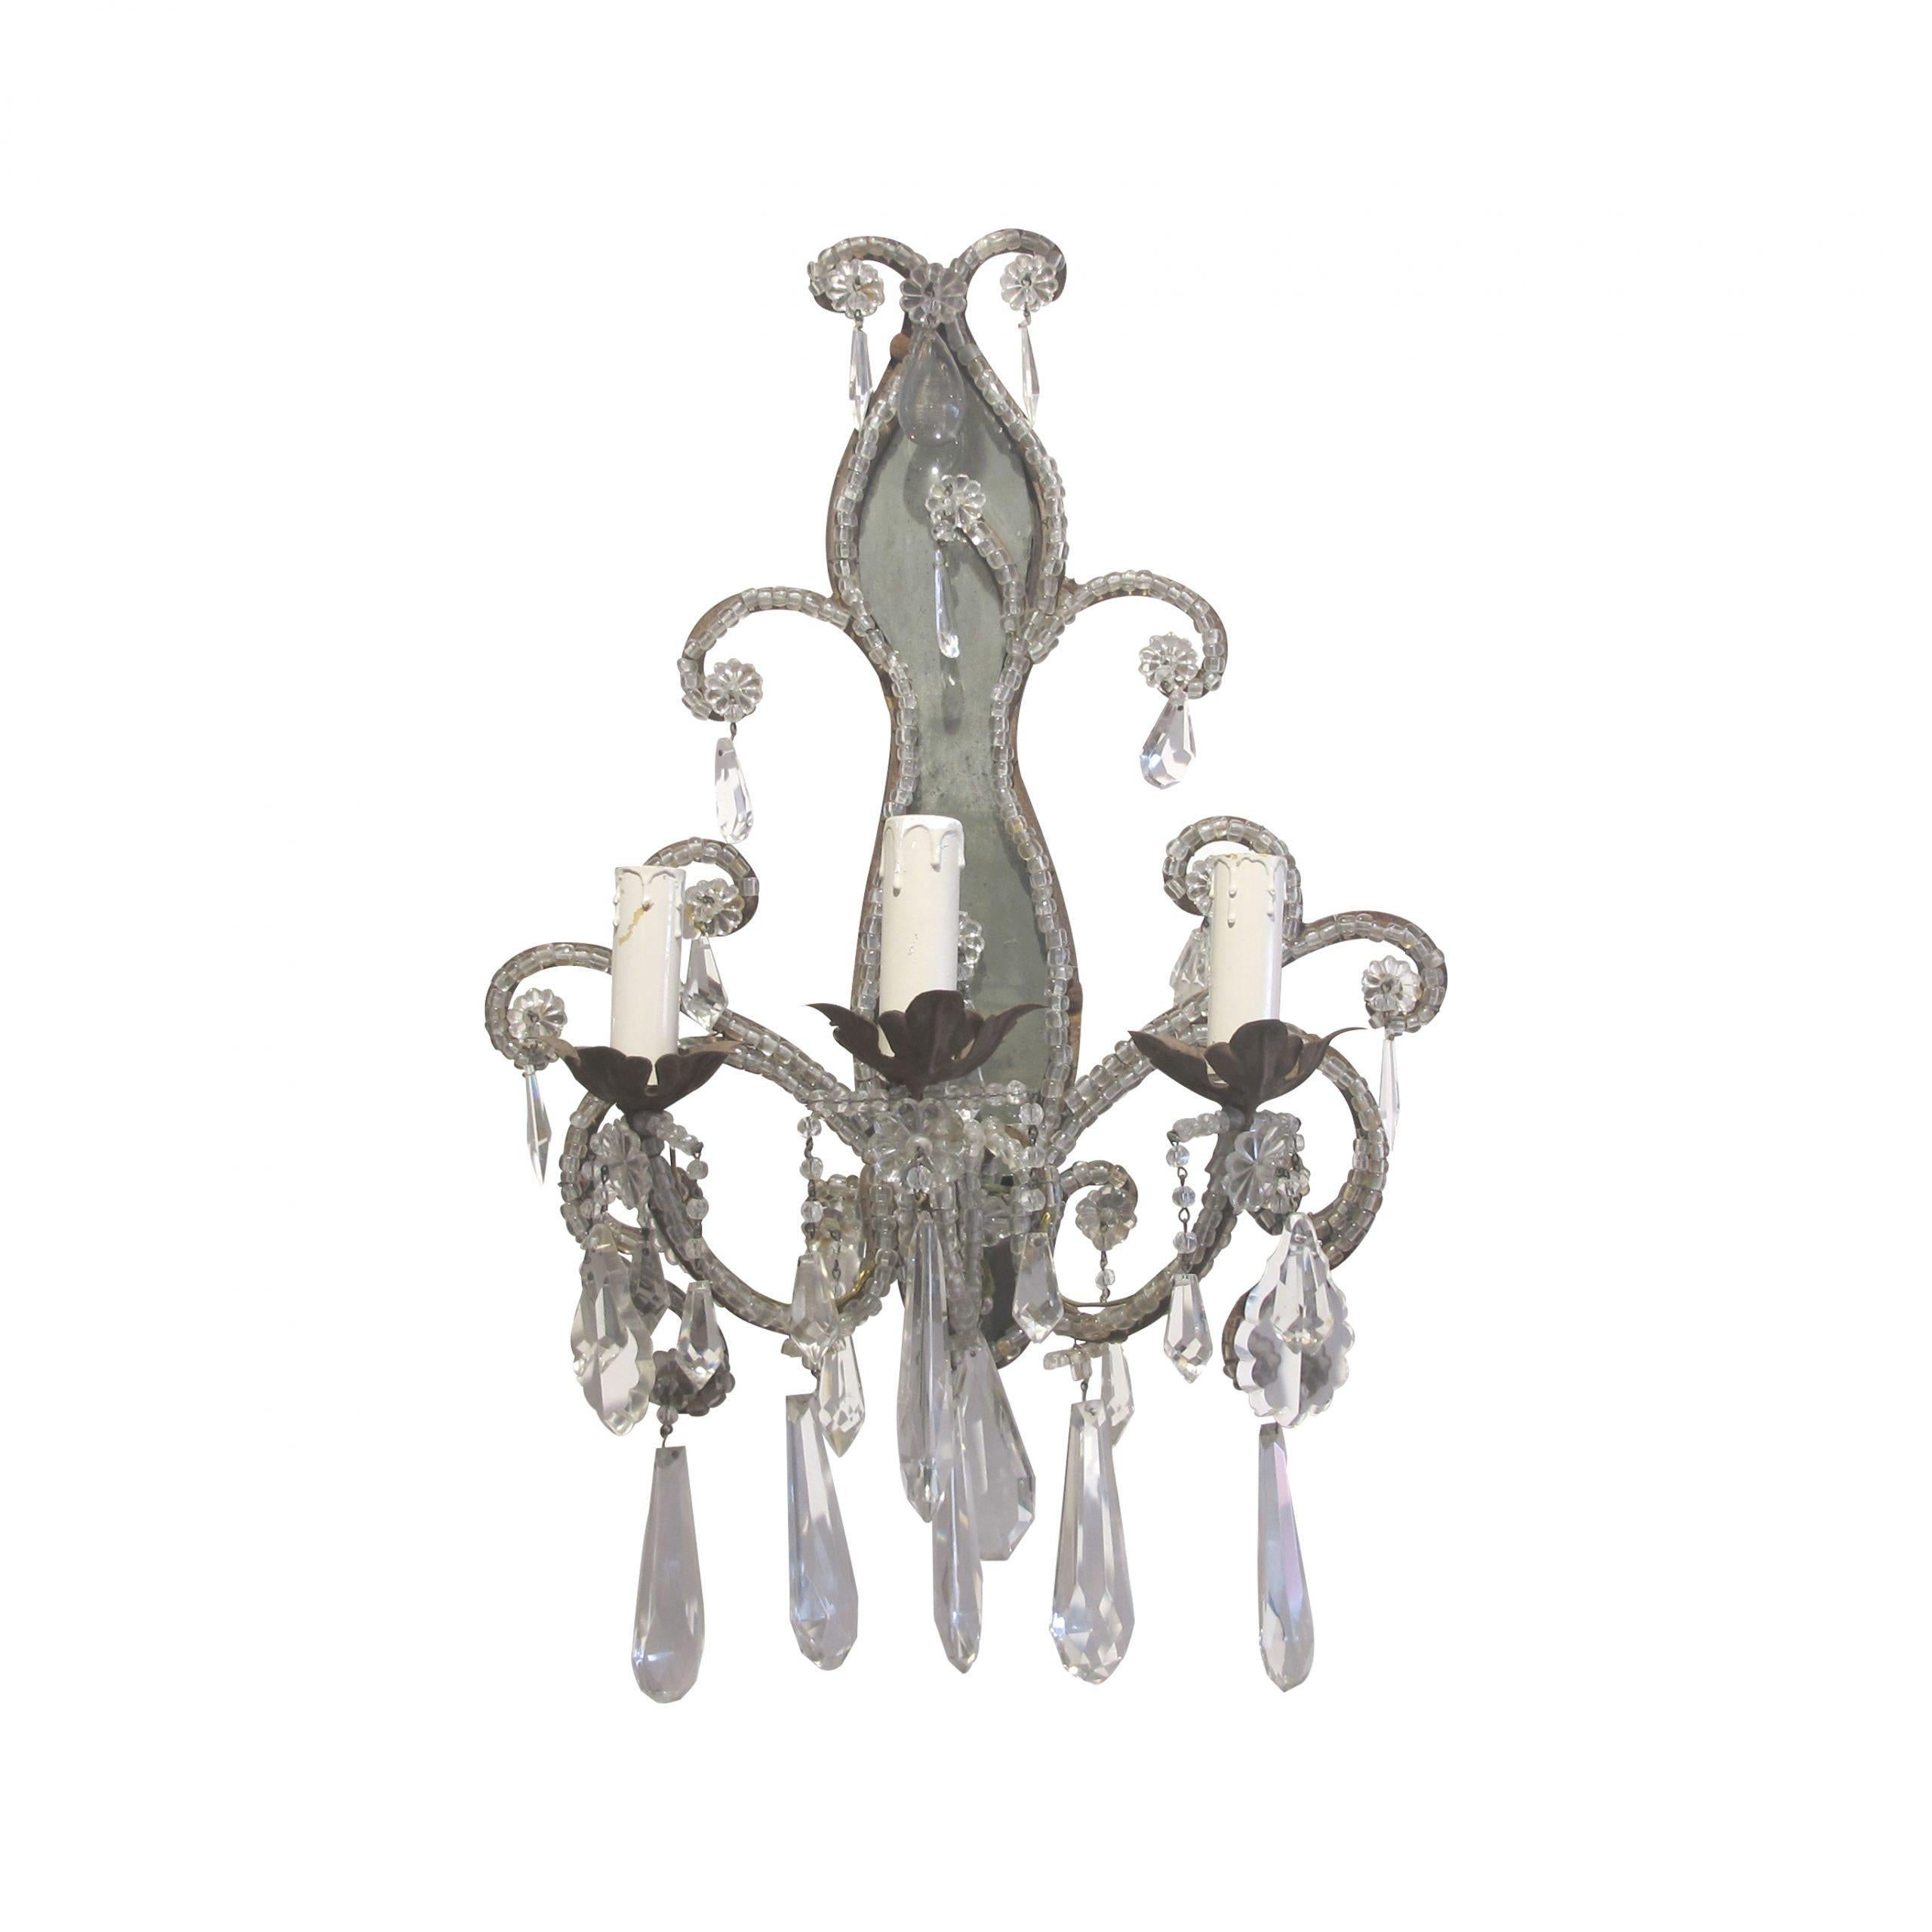 An elegant pair of early 20th century French wall lights with crystal bead swags and pampilles. Each wall sconce has three separate arms each featuring a candle shaped bulb holder at the end of each one. One sconce's mirrored backplate has a crack